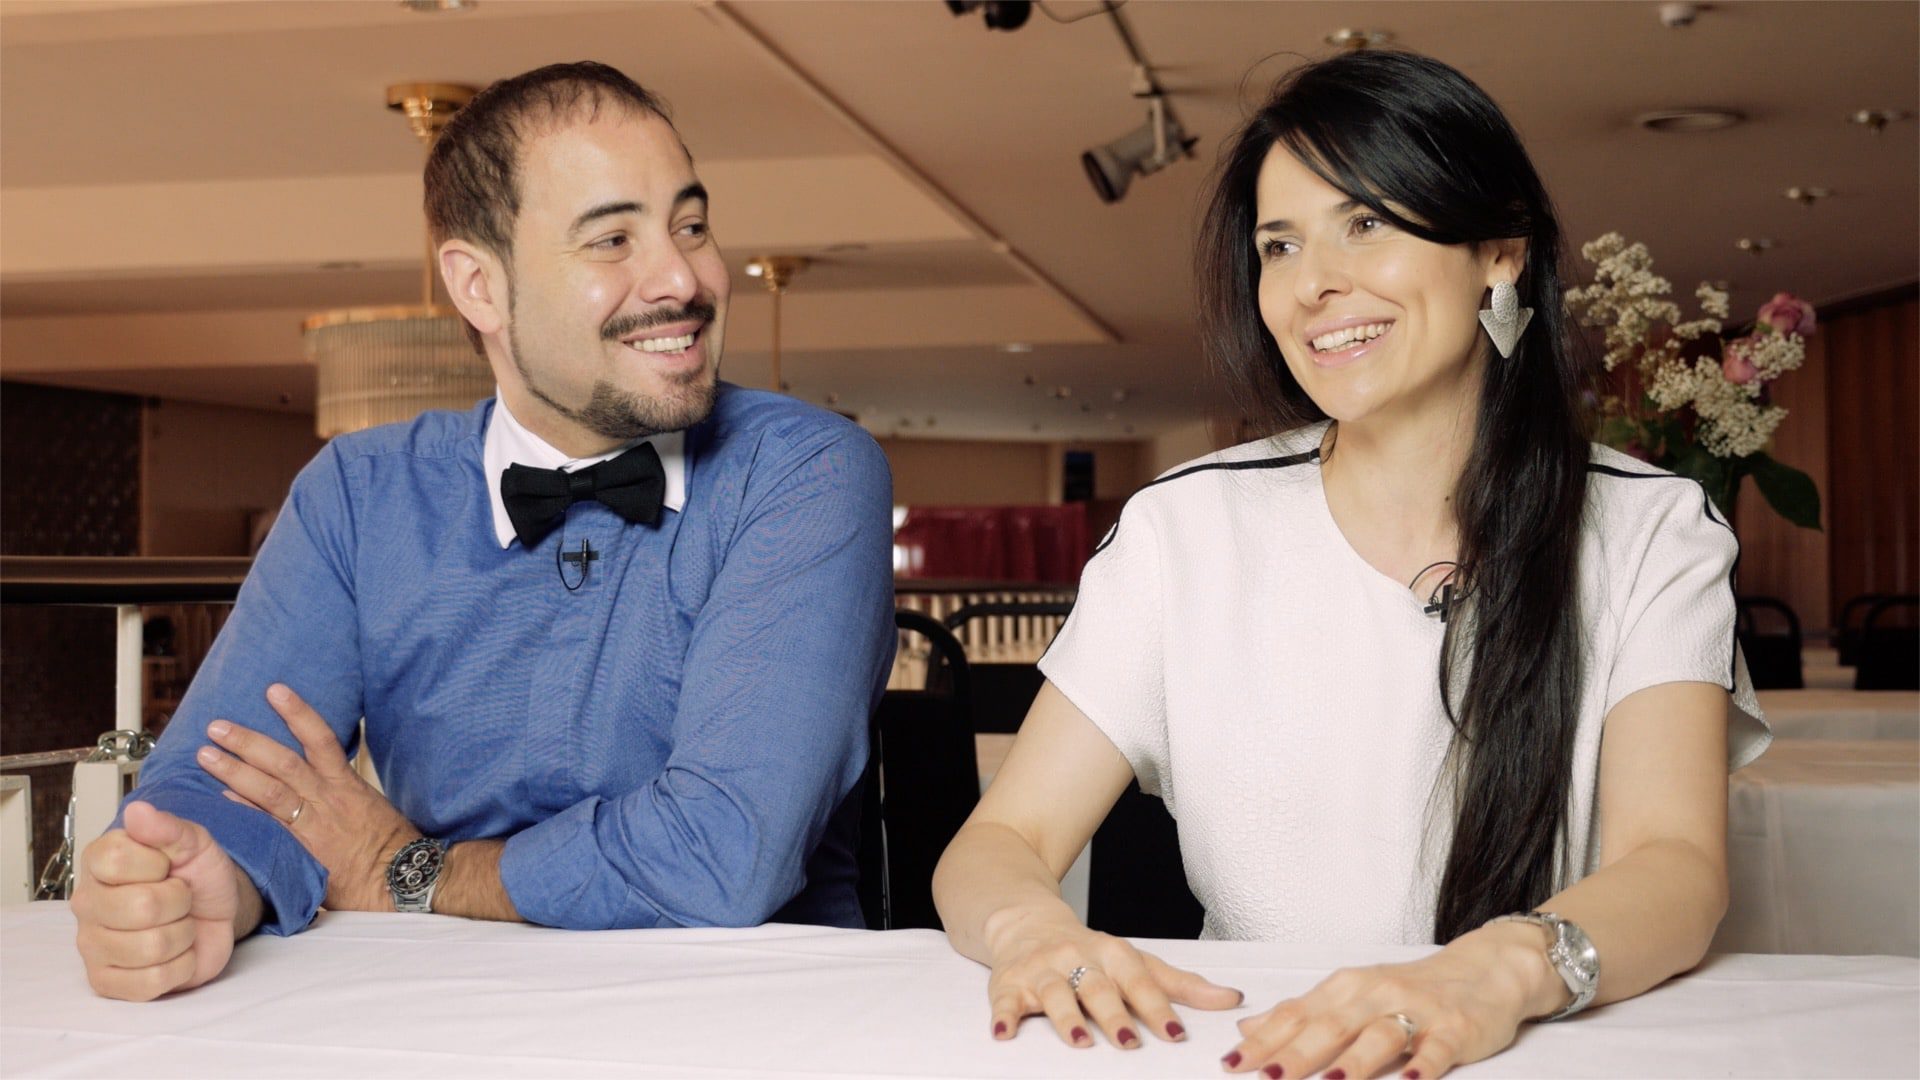 Video Preview Image of The influence of championships with Cristina Sosa and Daniel Nacucchio » 030tango Short